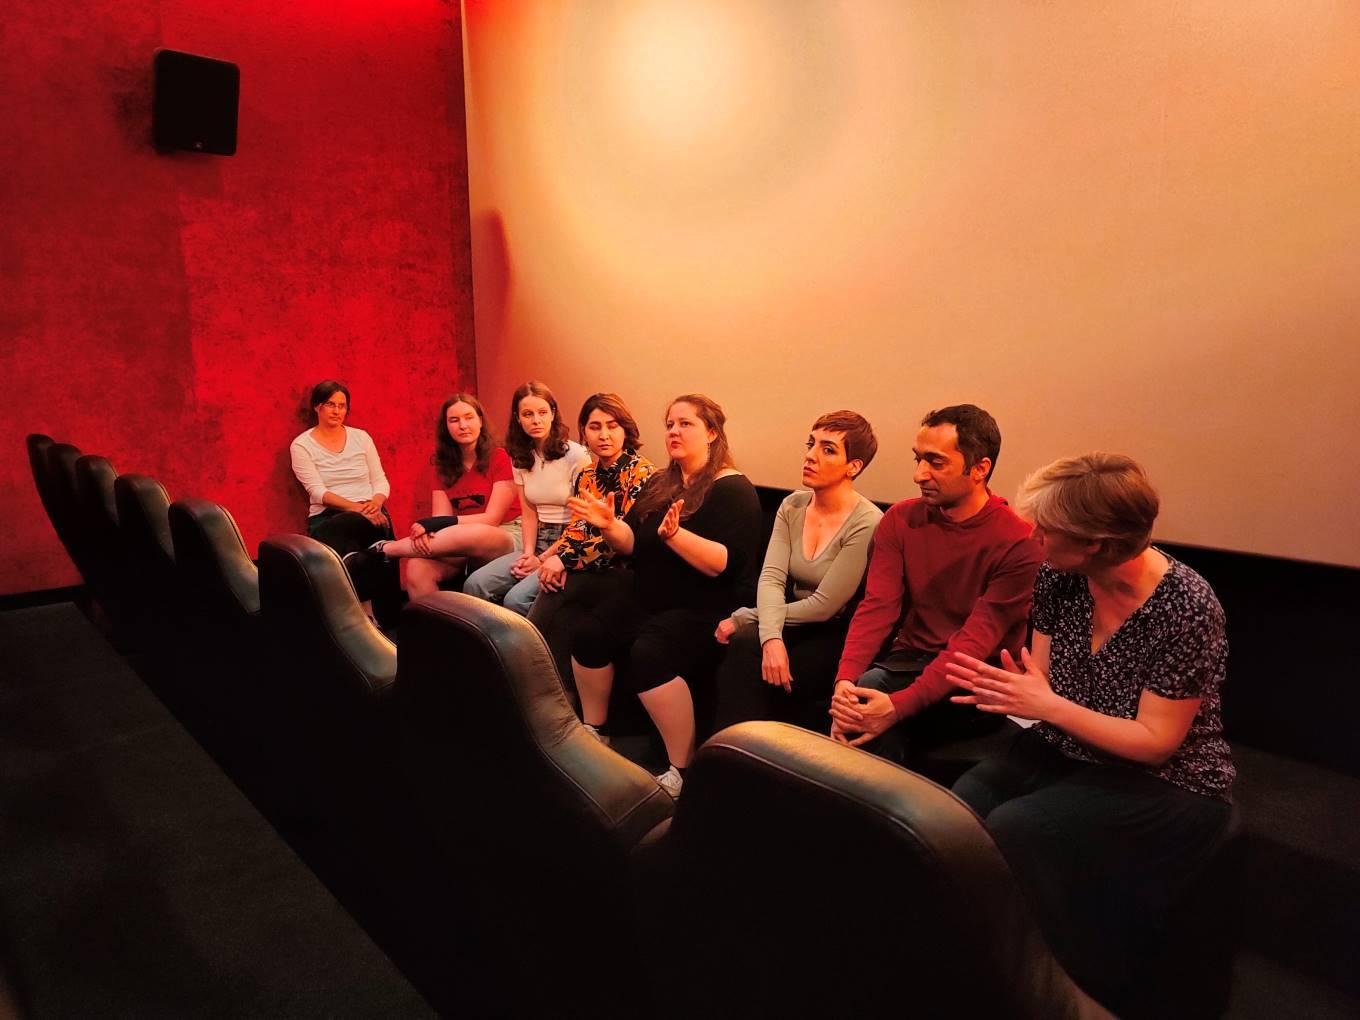 Q&A with the project and production team of "Border Crossings" during the premiere on June 26, 2022 at the Roxy-Lichtspiele cinema in Helmstedt.